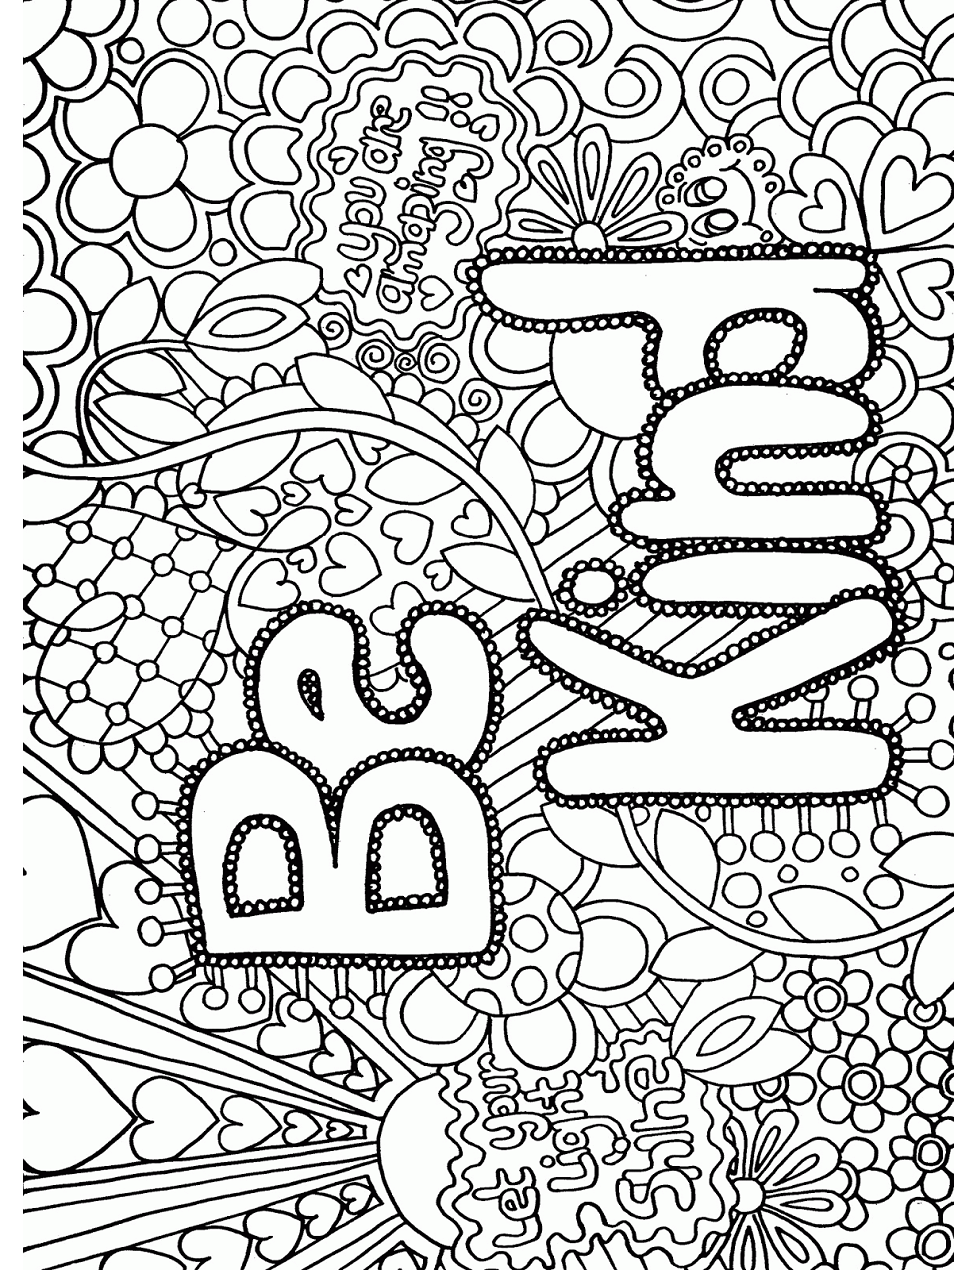 Be Kind Coloring Page - Free Printable Coloring Pages for Kids